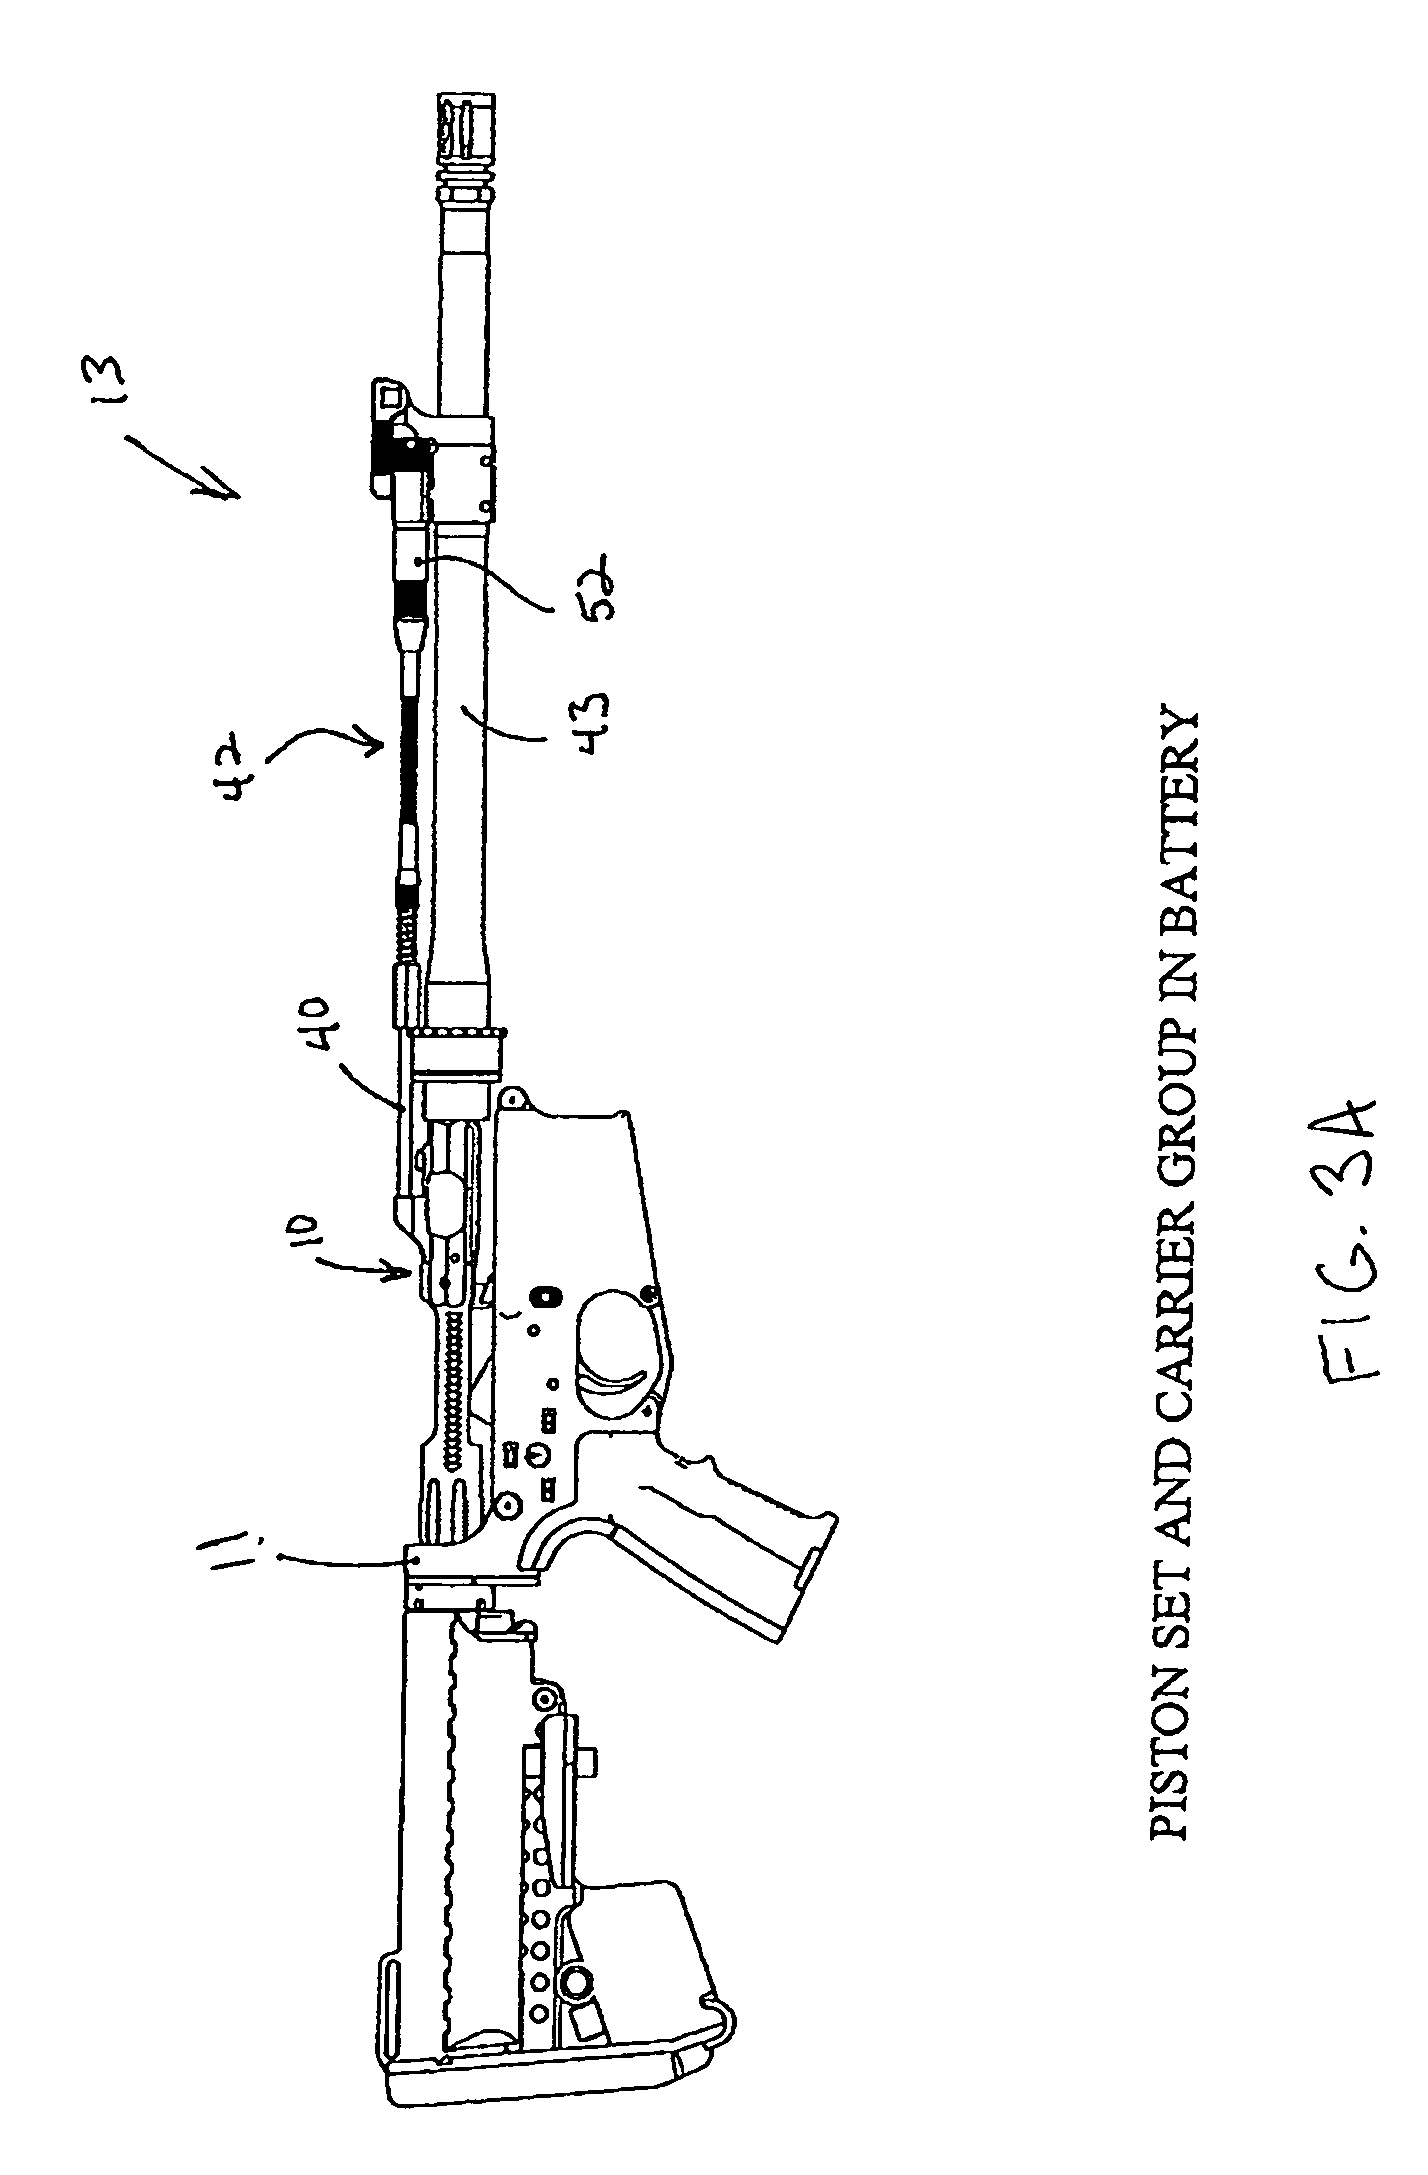 Self loading firearm bolt carrier with integral carrier key and angled strike face